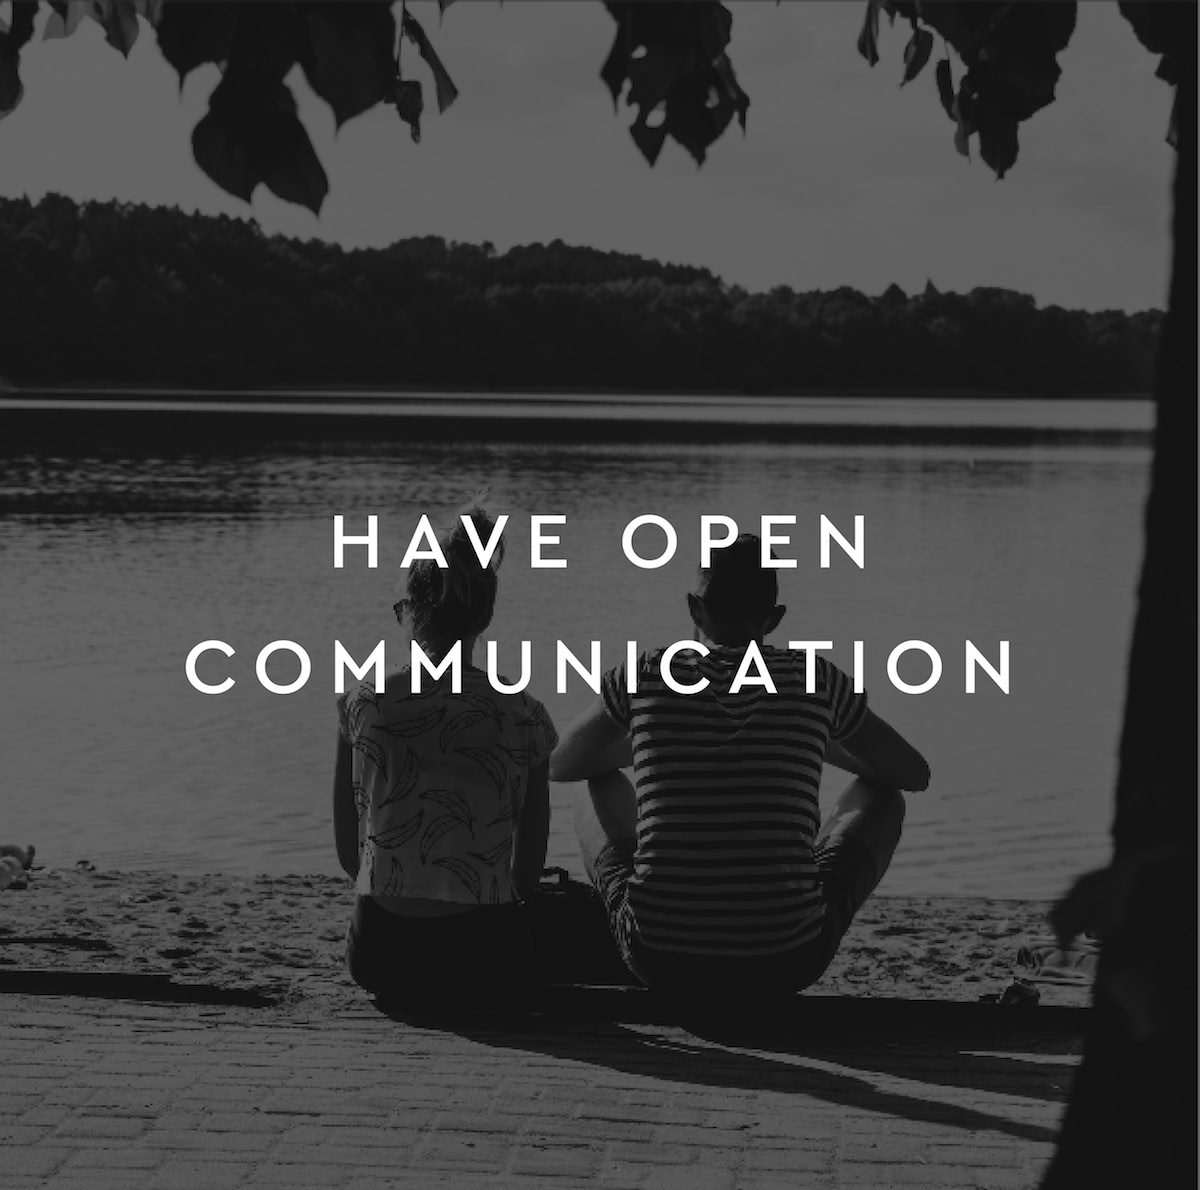 Have open communication